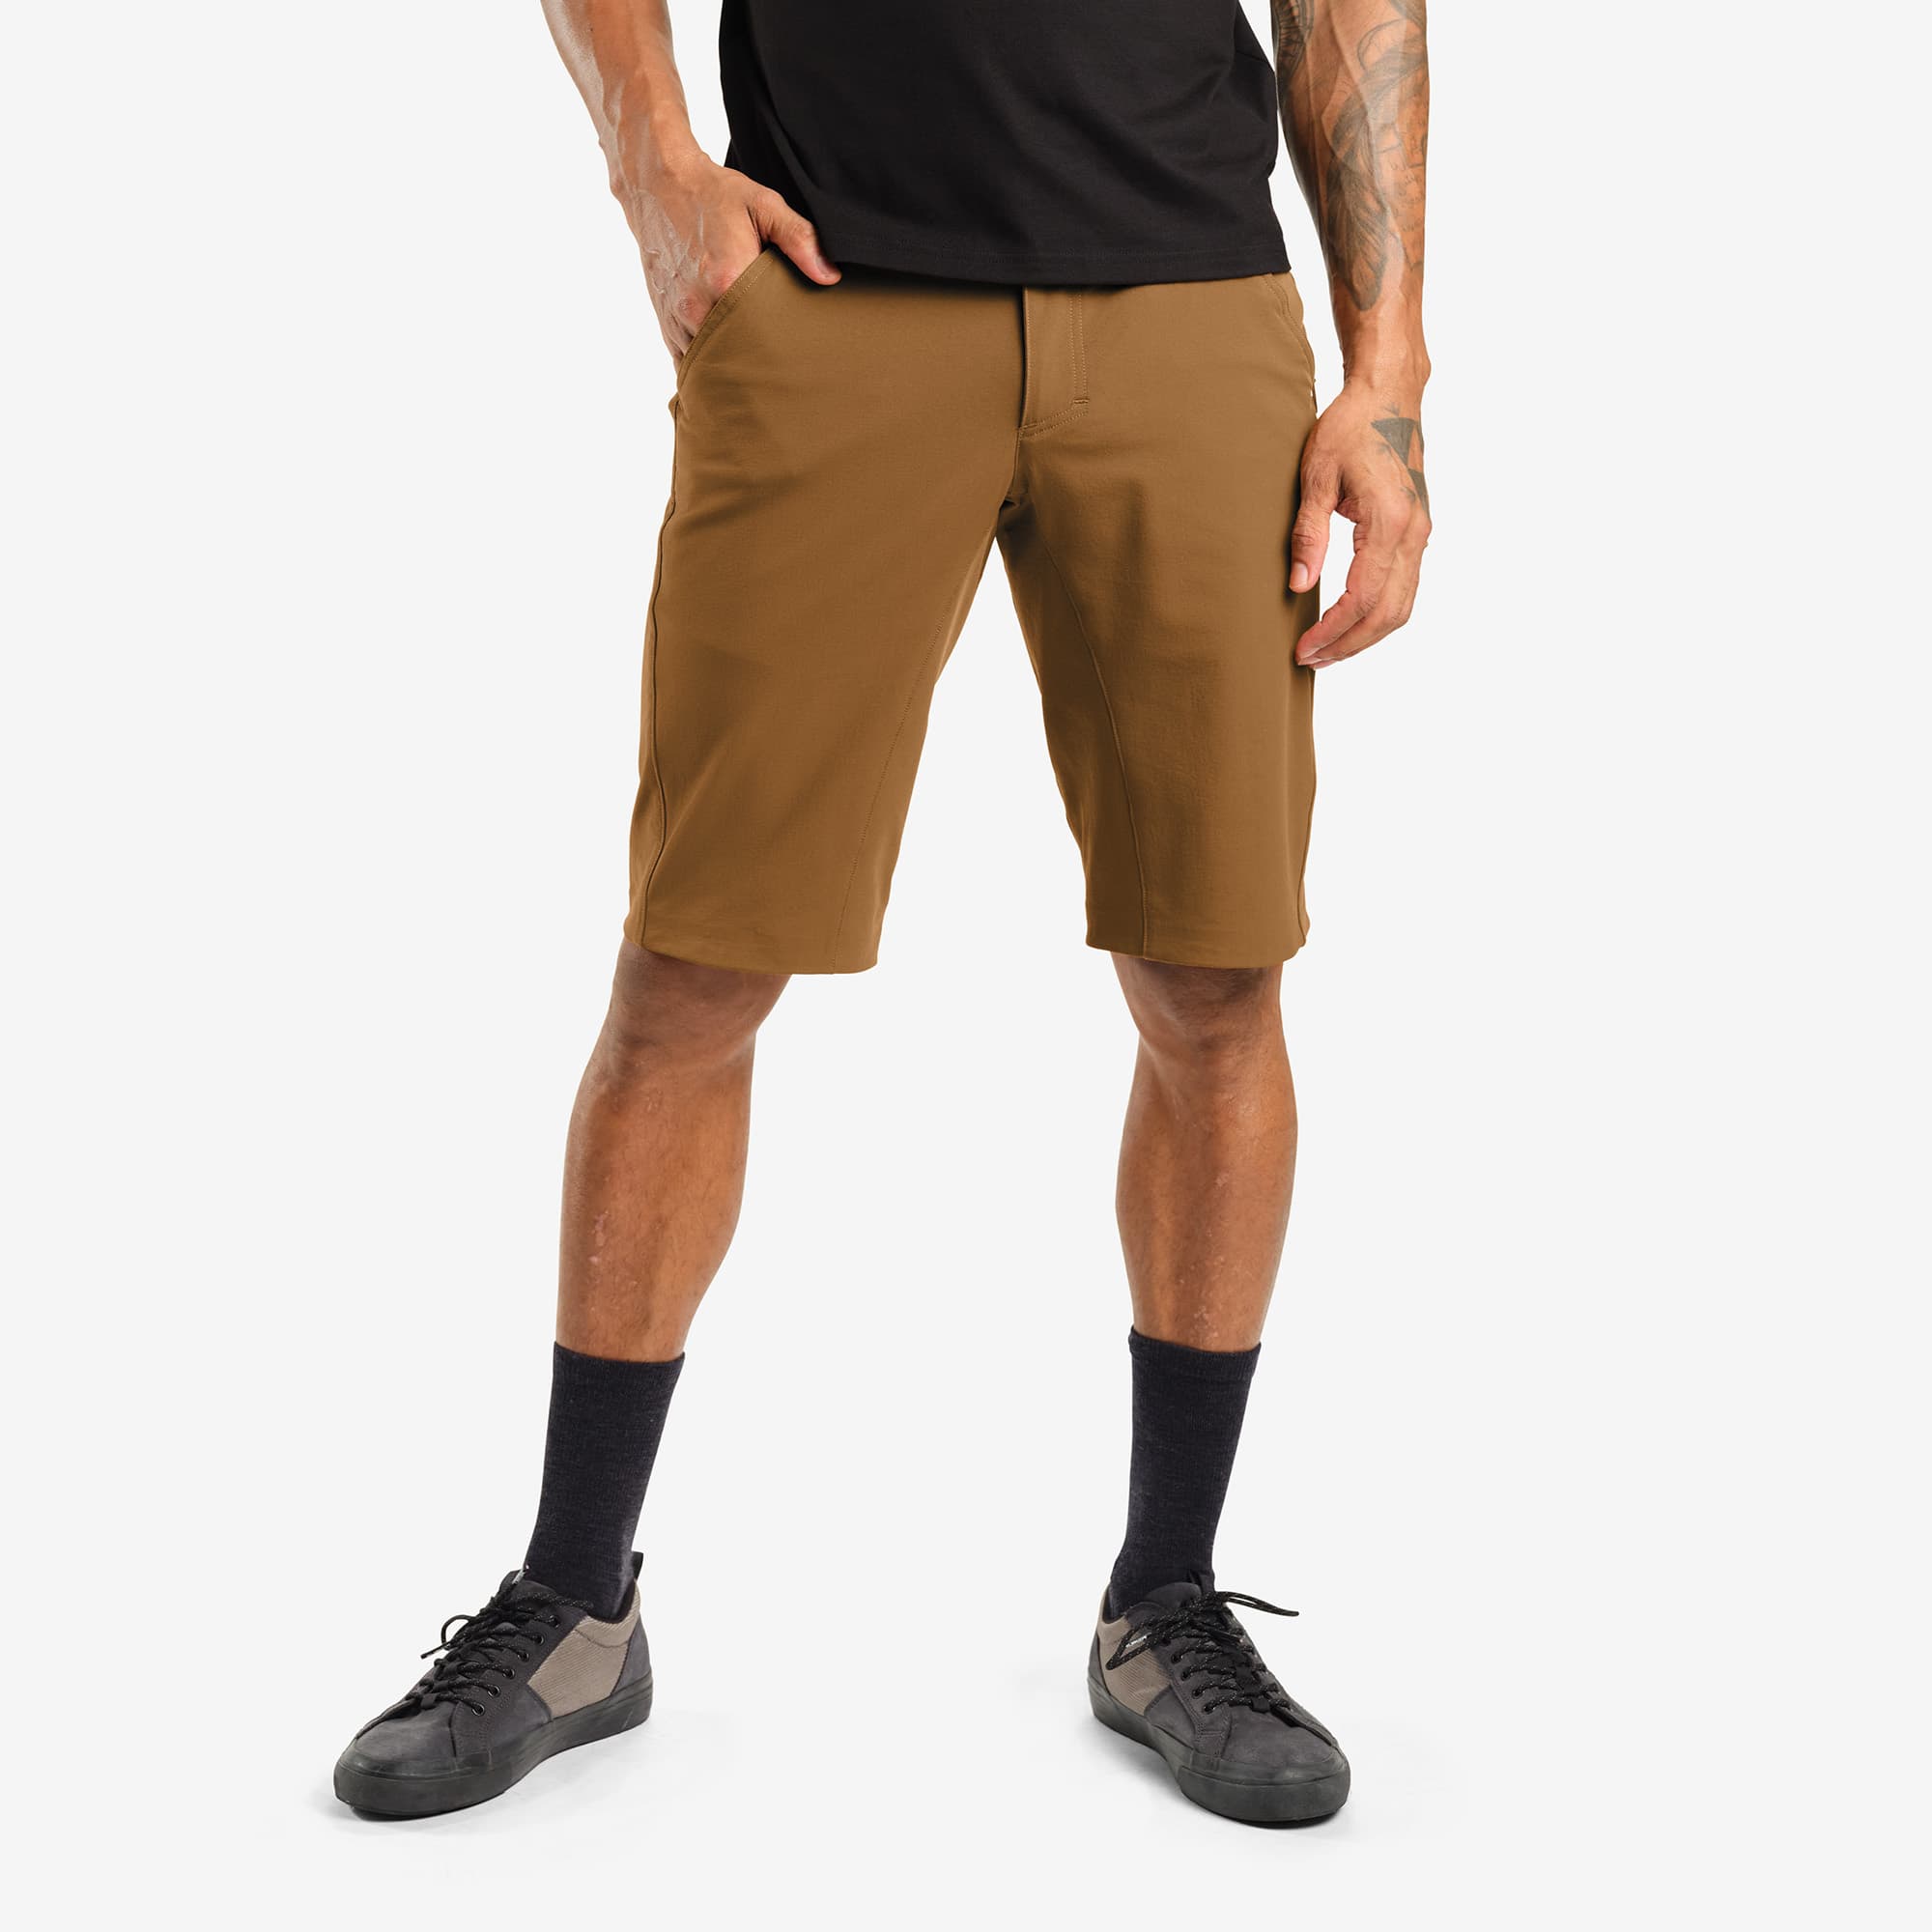 Men's tech Sutro Short in brown worn by a man #color_monks robe